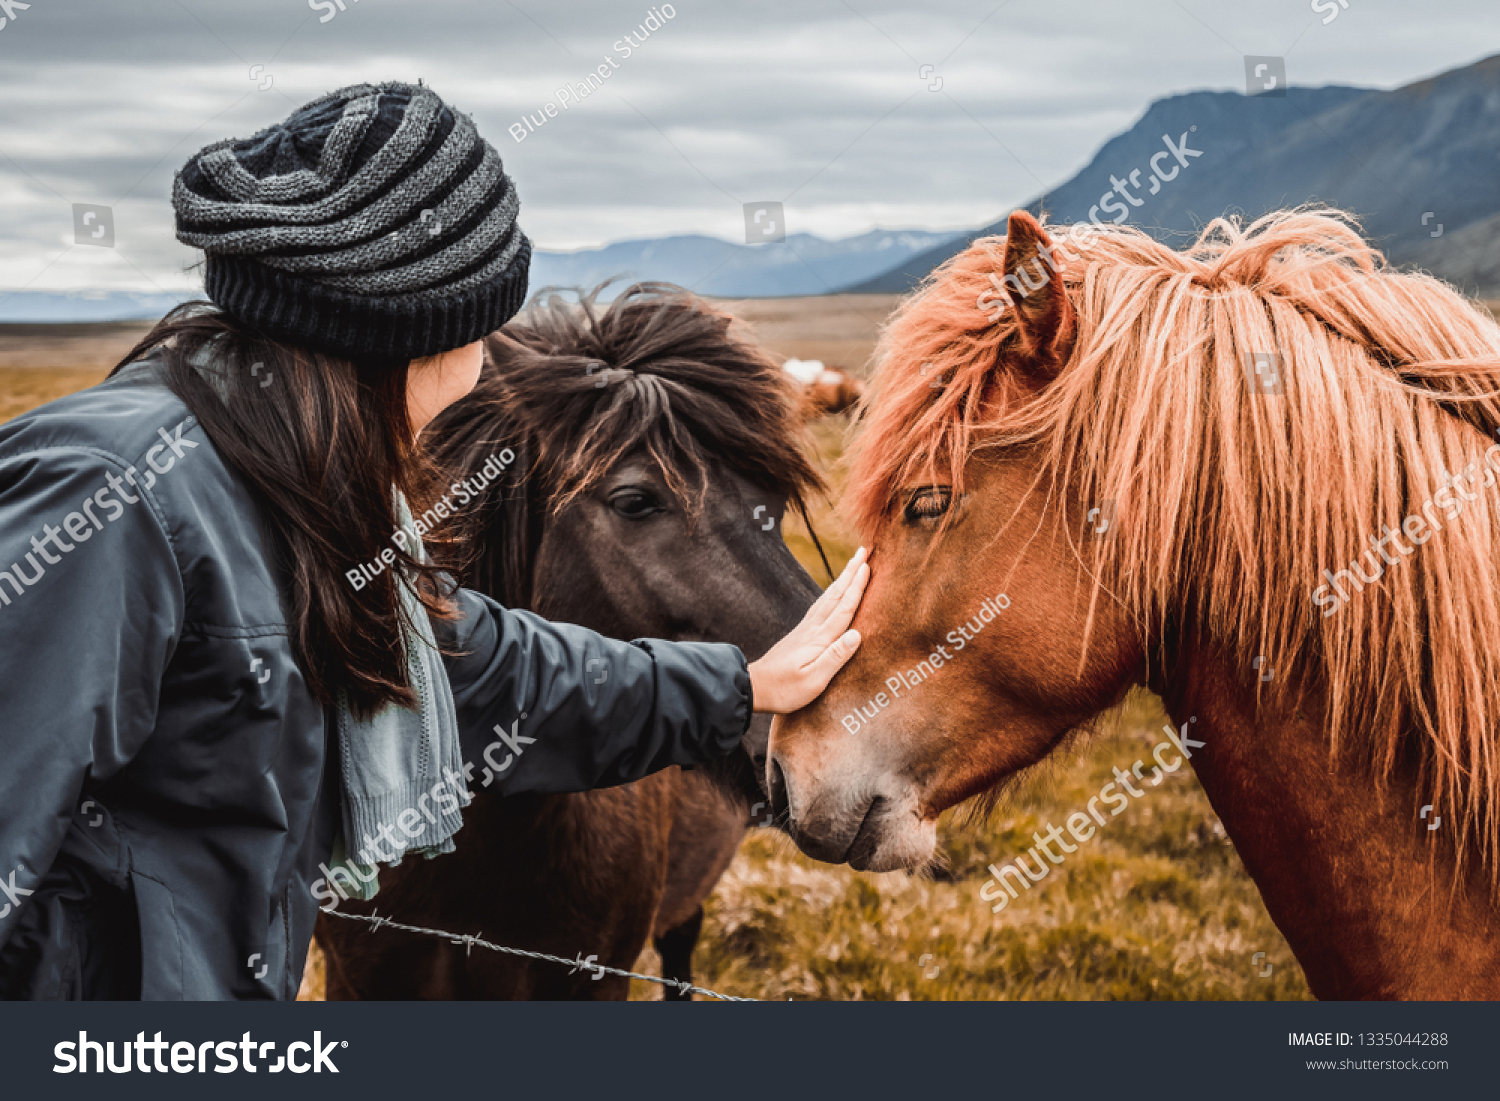 Icelandic horse in the field of scenic nature landscape of Iceland. The Icelandic horse is a breed of horse locally developed in Iceland as Icelandic law prevents horses from being imported. #1335044288